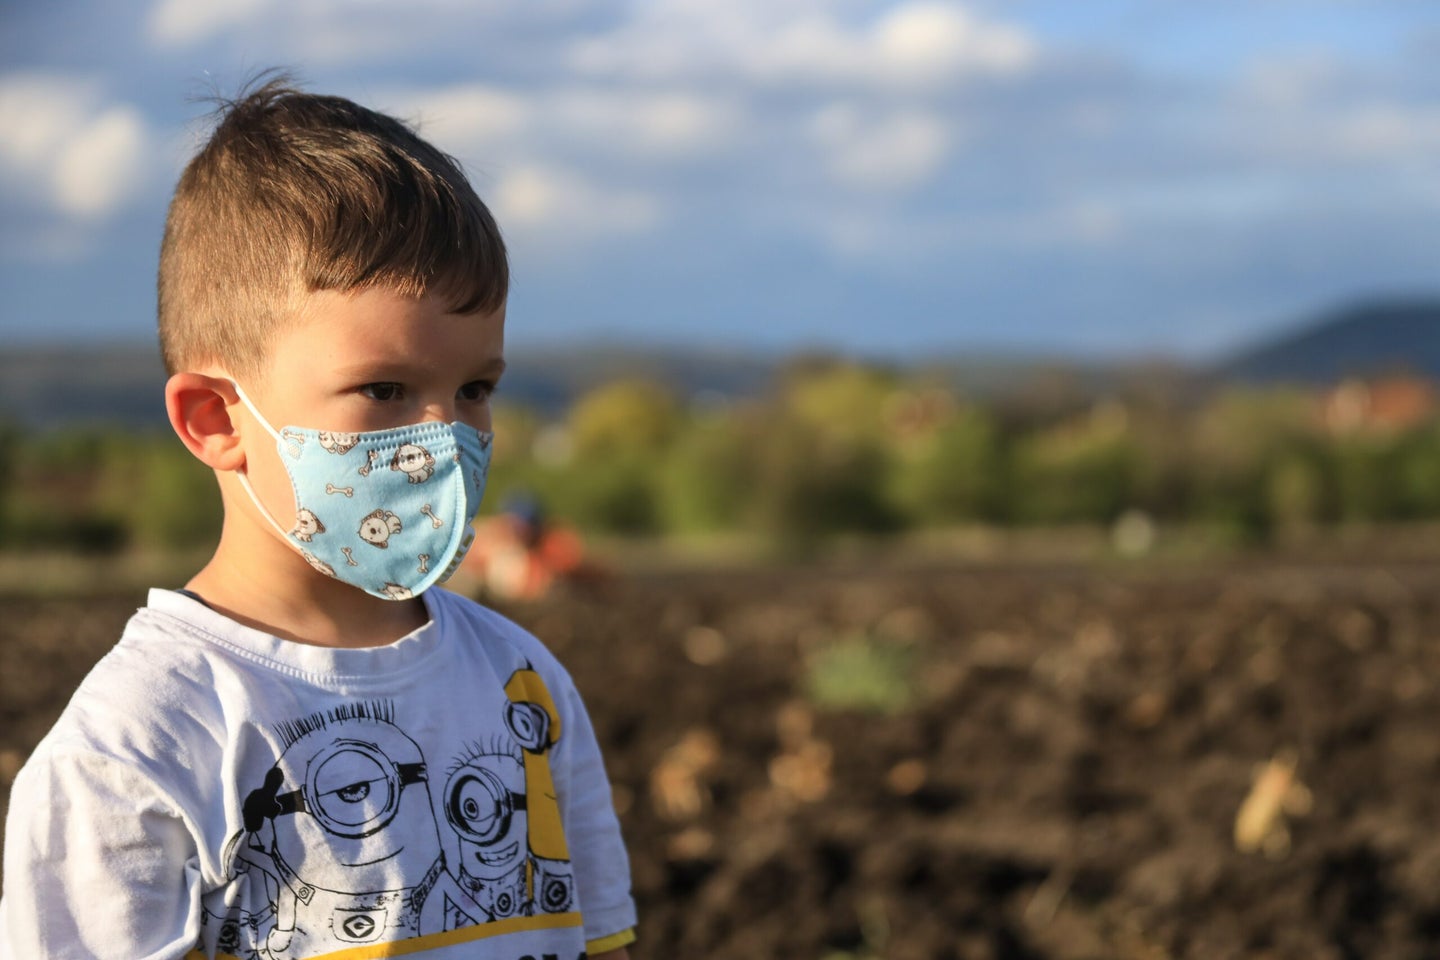 A kid with a cartoon-themed mask standing in a field